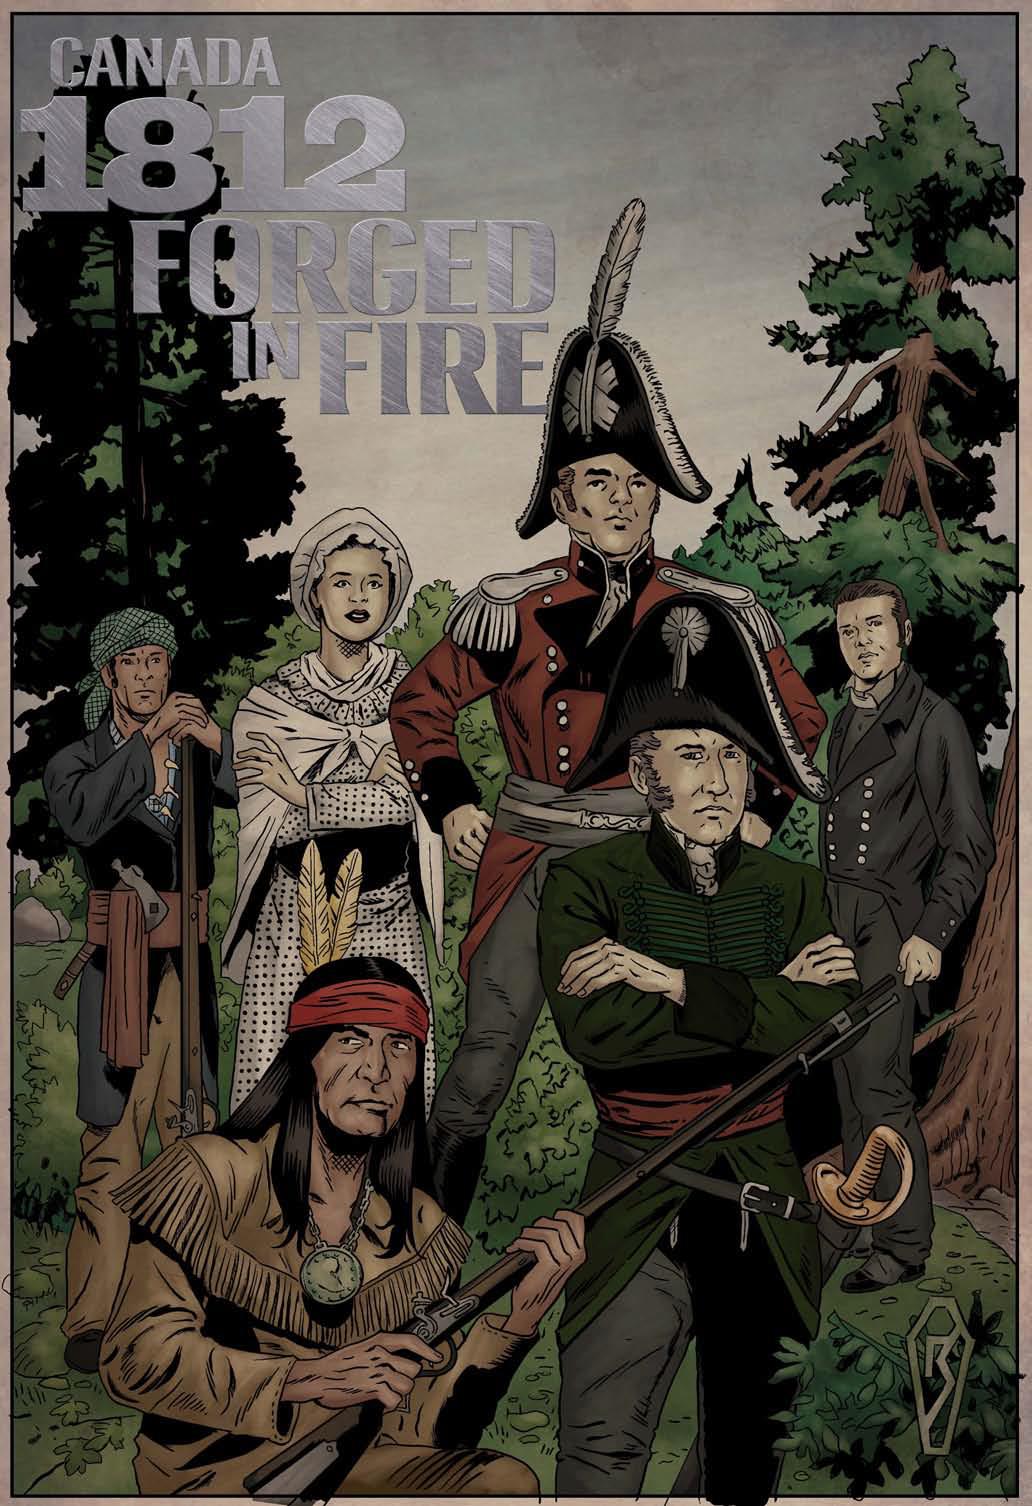 Rebranding Canada with Comics: Canada 1812: Forged in Fire and the Continuing Co-optation of Tecumseh